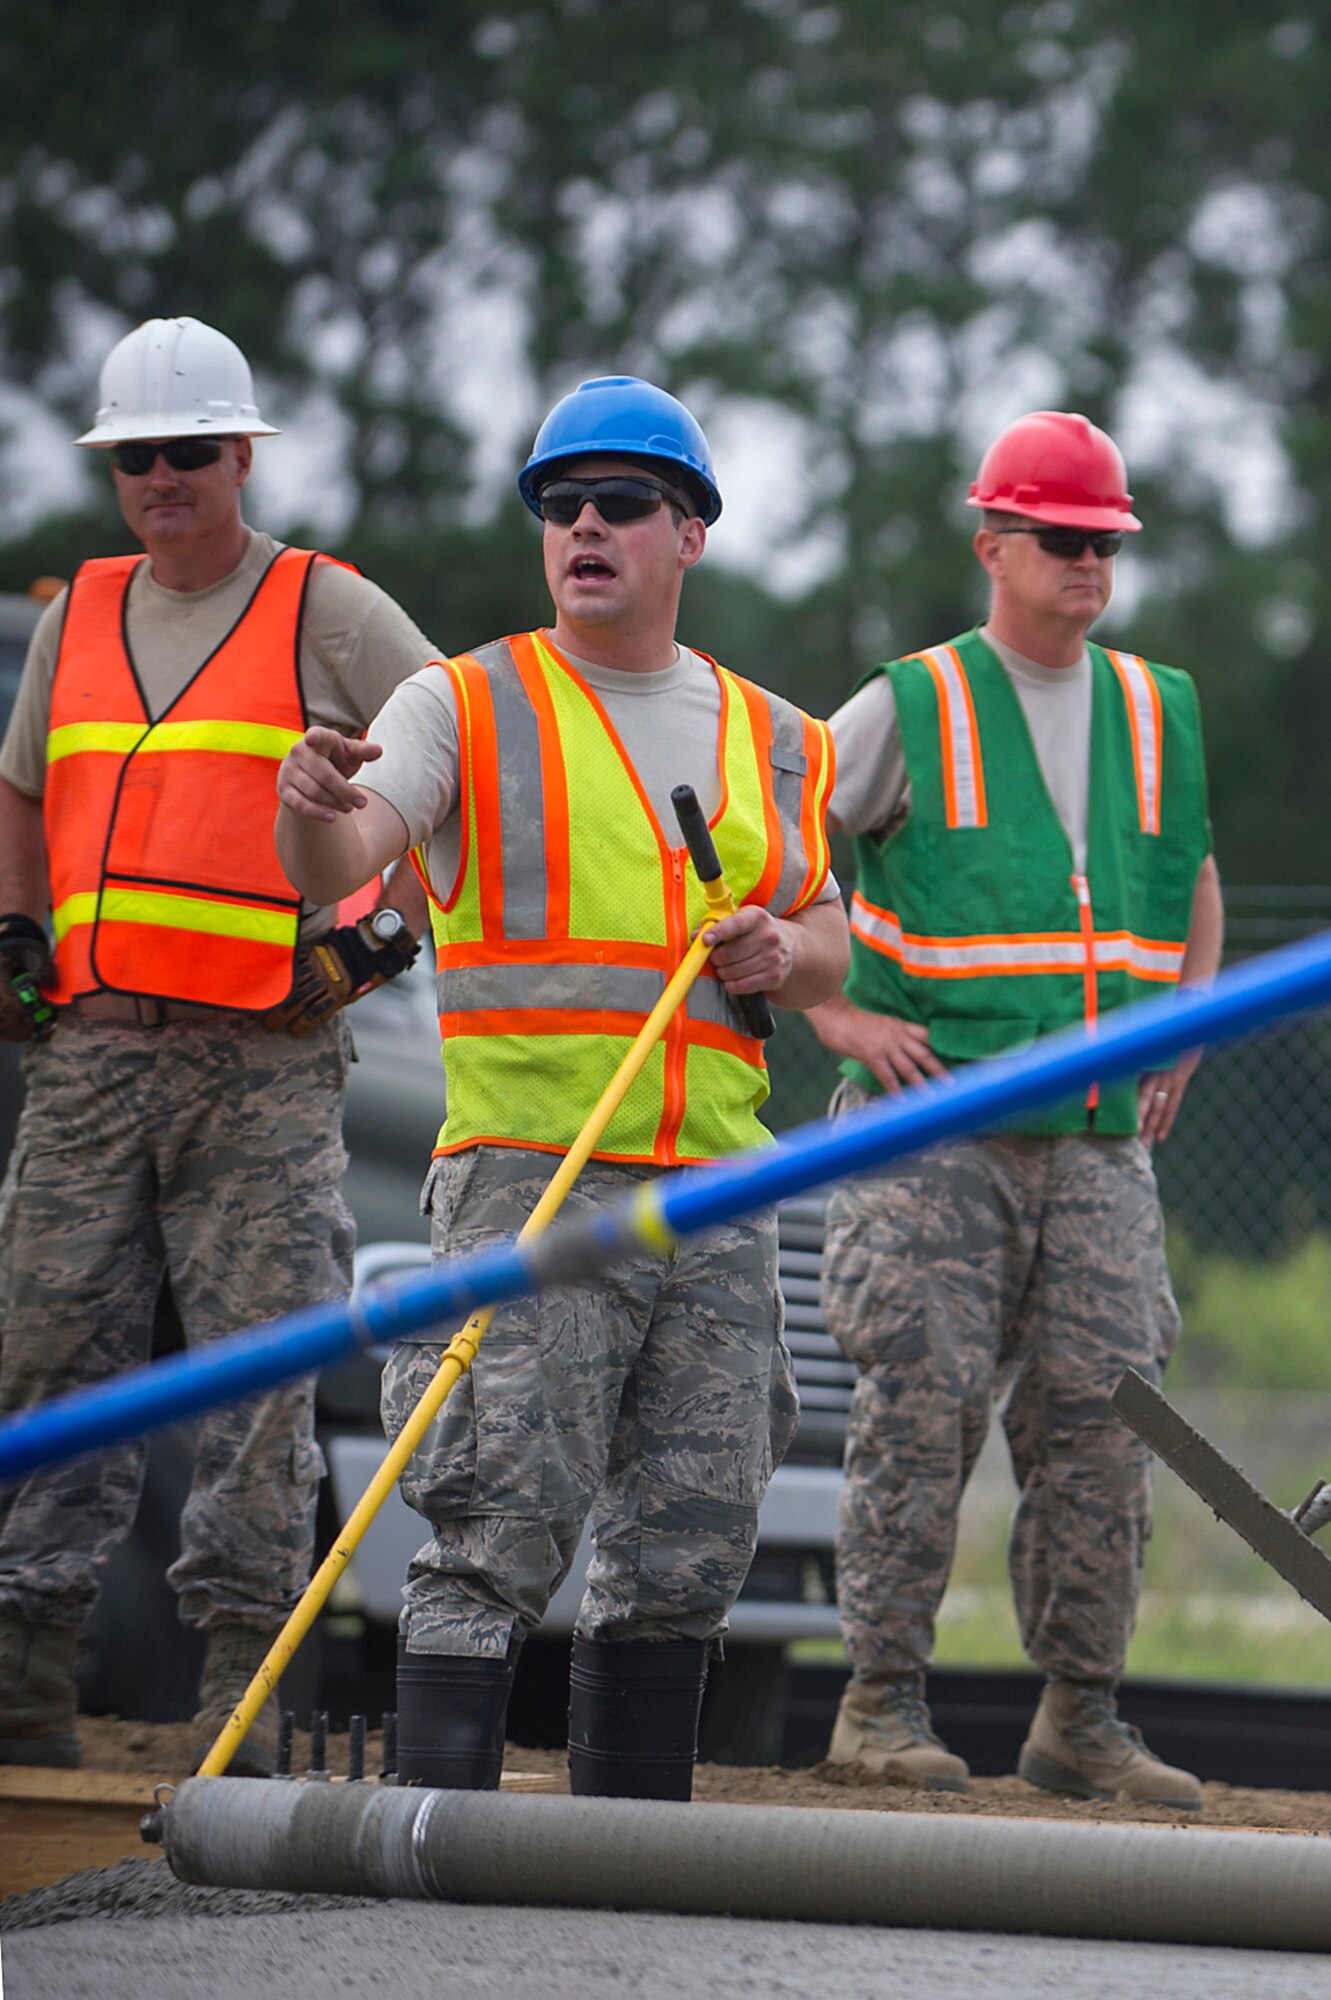 (From left) Master Sgt. Thomas Martin, 556th RED HORSE Squadron at Hurlburt Field, Florida, Senior Airman Jesse Steinberg, 628th Civil Engineer Squadron at Joint Base Charleston, and Tech Sgt. Bradley Atherton, 560th RHS at Joint Base Charleston, spread concrete with a roller screed during a joint construction project at Joint Base Charleston. Members of the 560th RHS, 628th CES, 556th RHS, 555th RHS from Nellis Air Force Base, Nevada, and 567th RHS from Seymour Johnson Air Force Base, North Carolina joined forces June, July and August at Joint Base Charleston to build a 4,800 square-foot preengineered  building building to store 560th RHS construction equipment and gear.  Rapid Engineer Deployable, Heavy Operational Repair Squadron, Engineer (RED HORSE) squadrons provide the Air Force with a highly mobile civil engineering capability in support of contingency and special operations worldwide. They are self-sufficient, mobile squadrons that provide heavy construction support such as runway/facility construction, electrical upgrades, and equipment transport when requirements exceed normal base civil engineer capabilities and where Army engineer support is not readily available. (U.S. Air Force Photo by Michael Dukes)